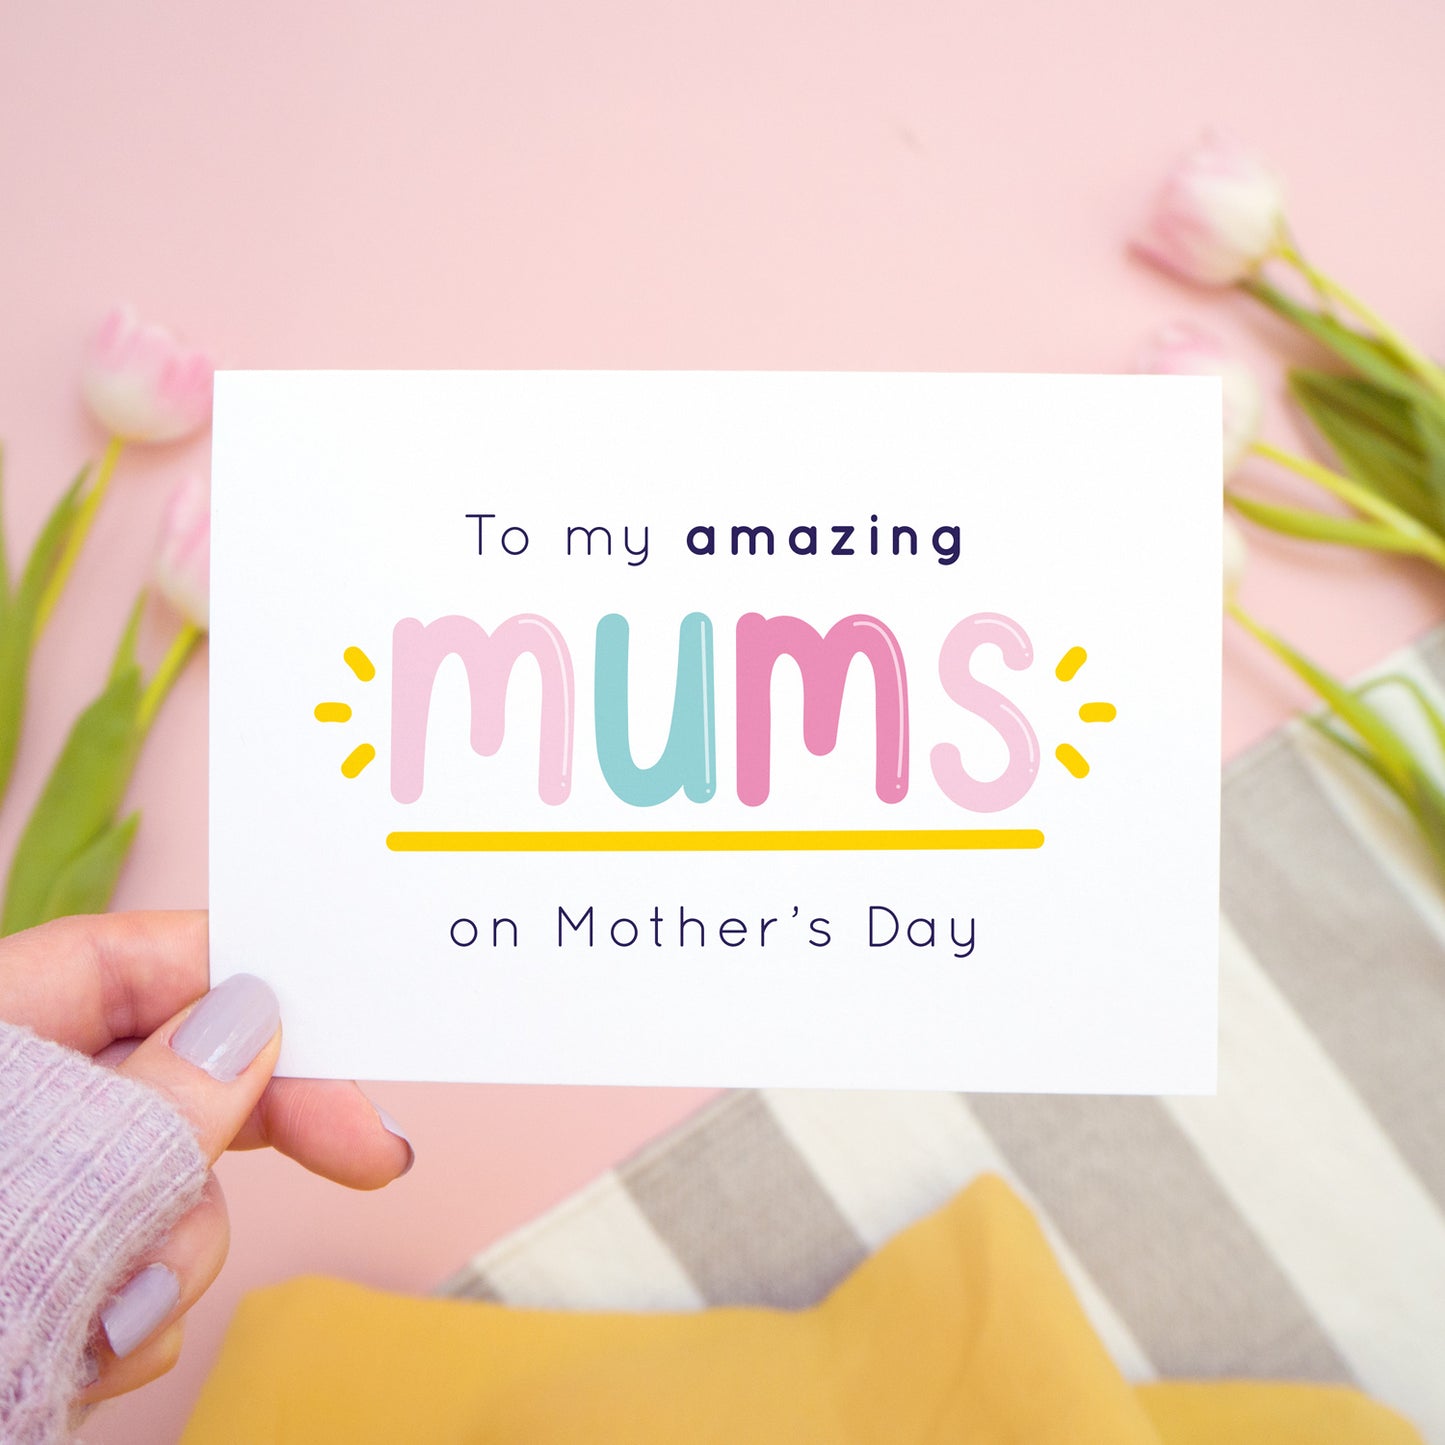 An amazing mums mother’s day card designed for those lucky enough to have two mums! This card is being held over a pink background with a grey and white rug with tulips to the side. This card is in the pink and blue colour palette.